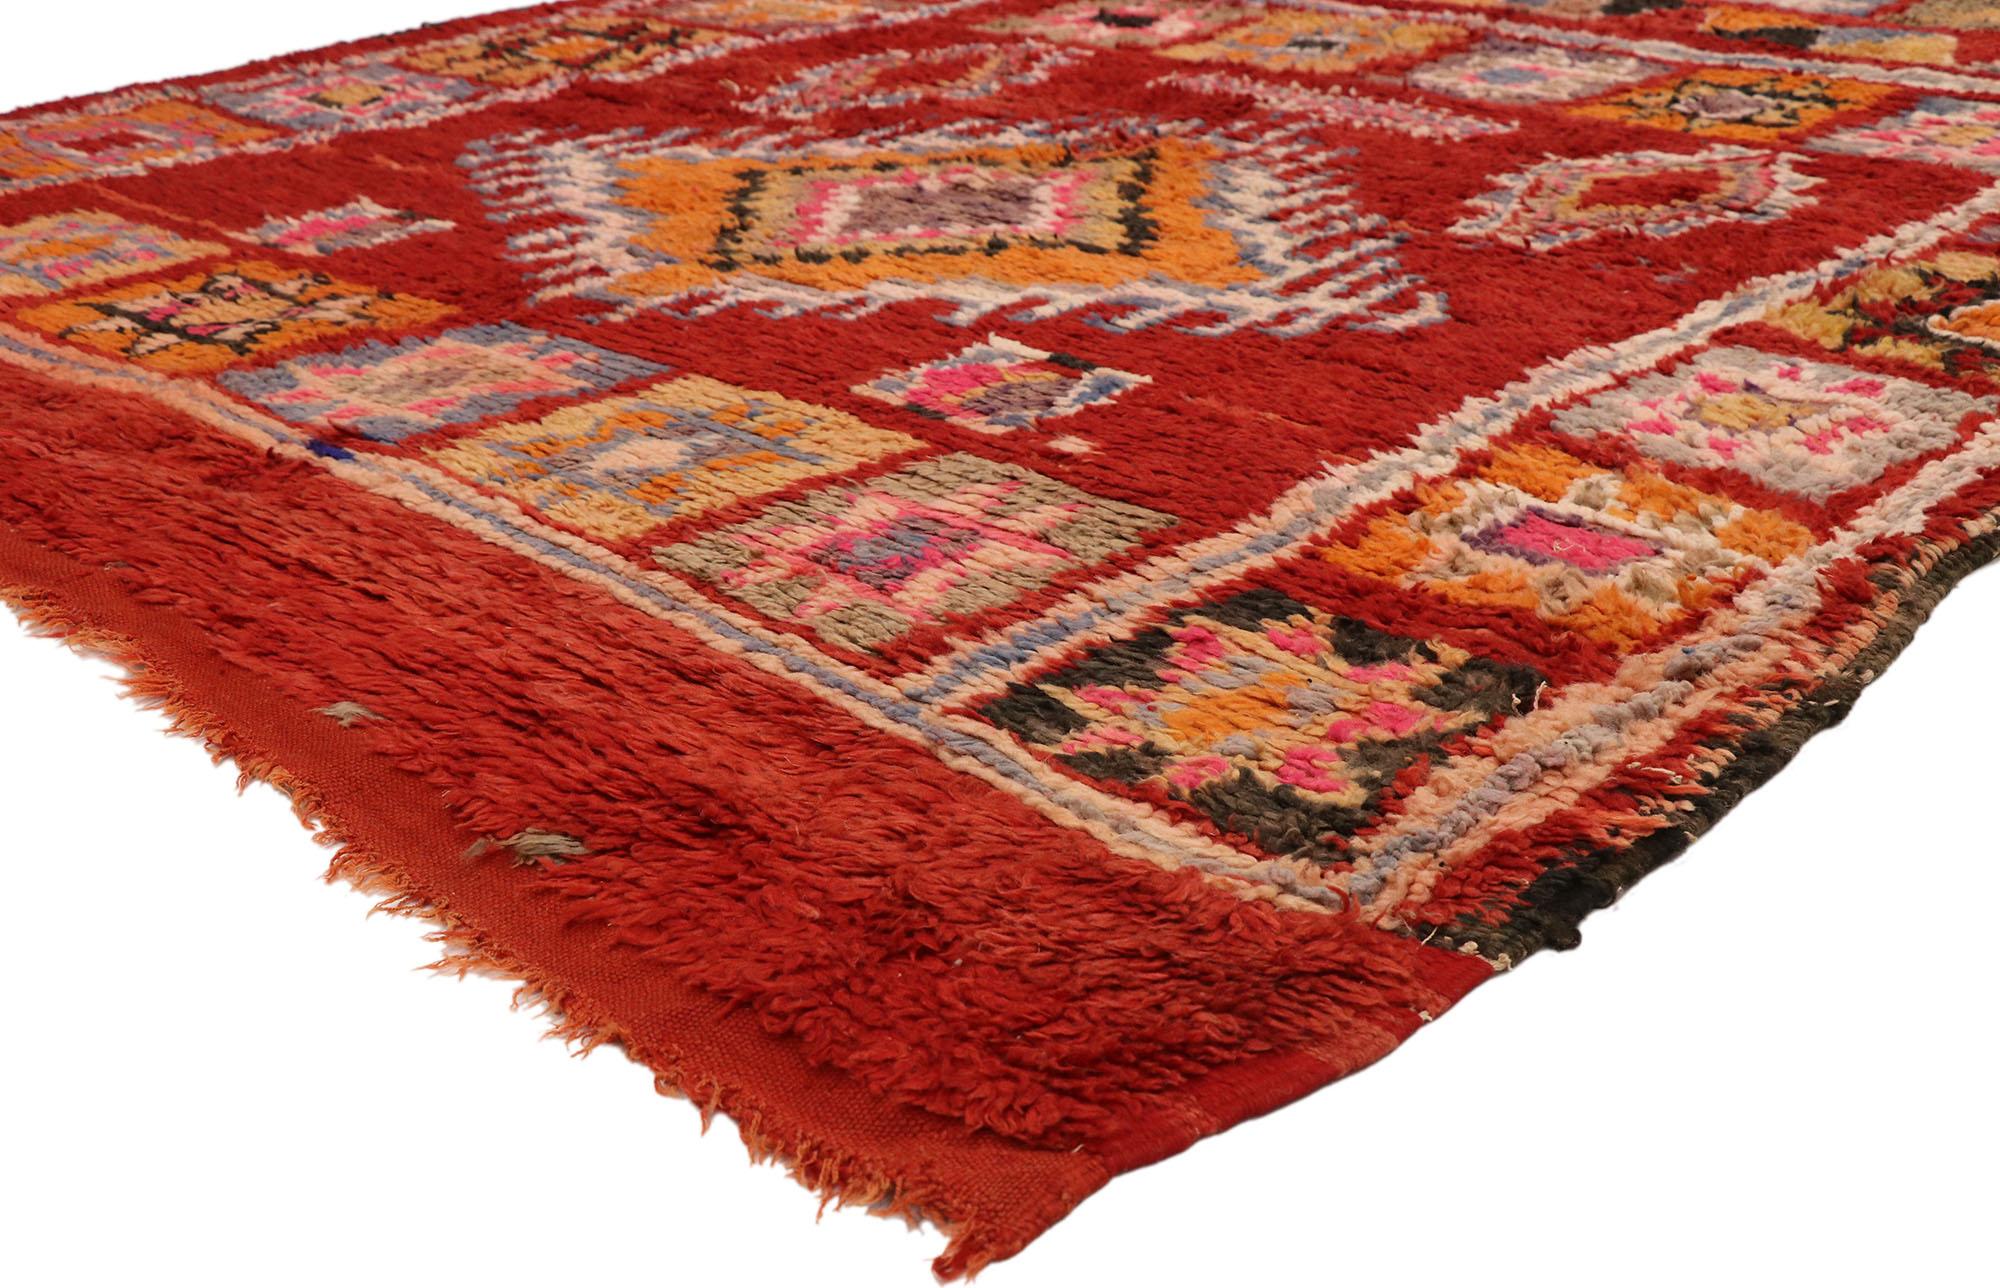 20920, vintage Berber Moroccan rug with boho chic Tribal Artisan style 07'00 x 08'00. This hand knotted wool vintage Berber Moroccan rug features a red abrashed field covered with various ambiguous tribal symbols that carry great meaning in Ancient